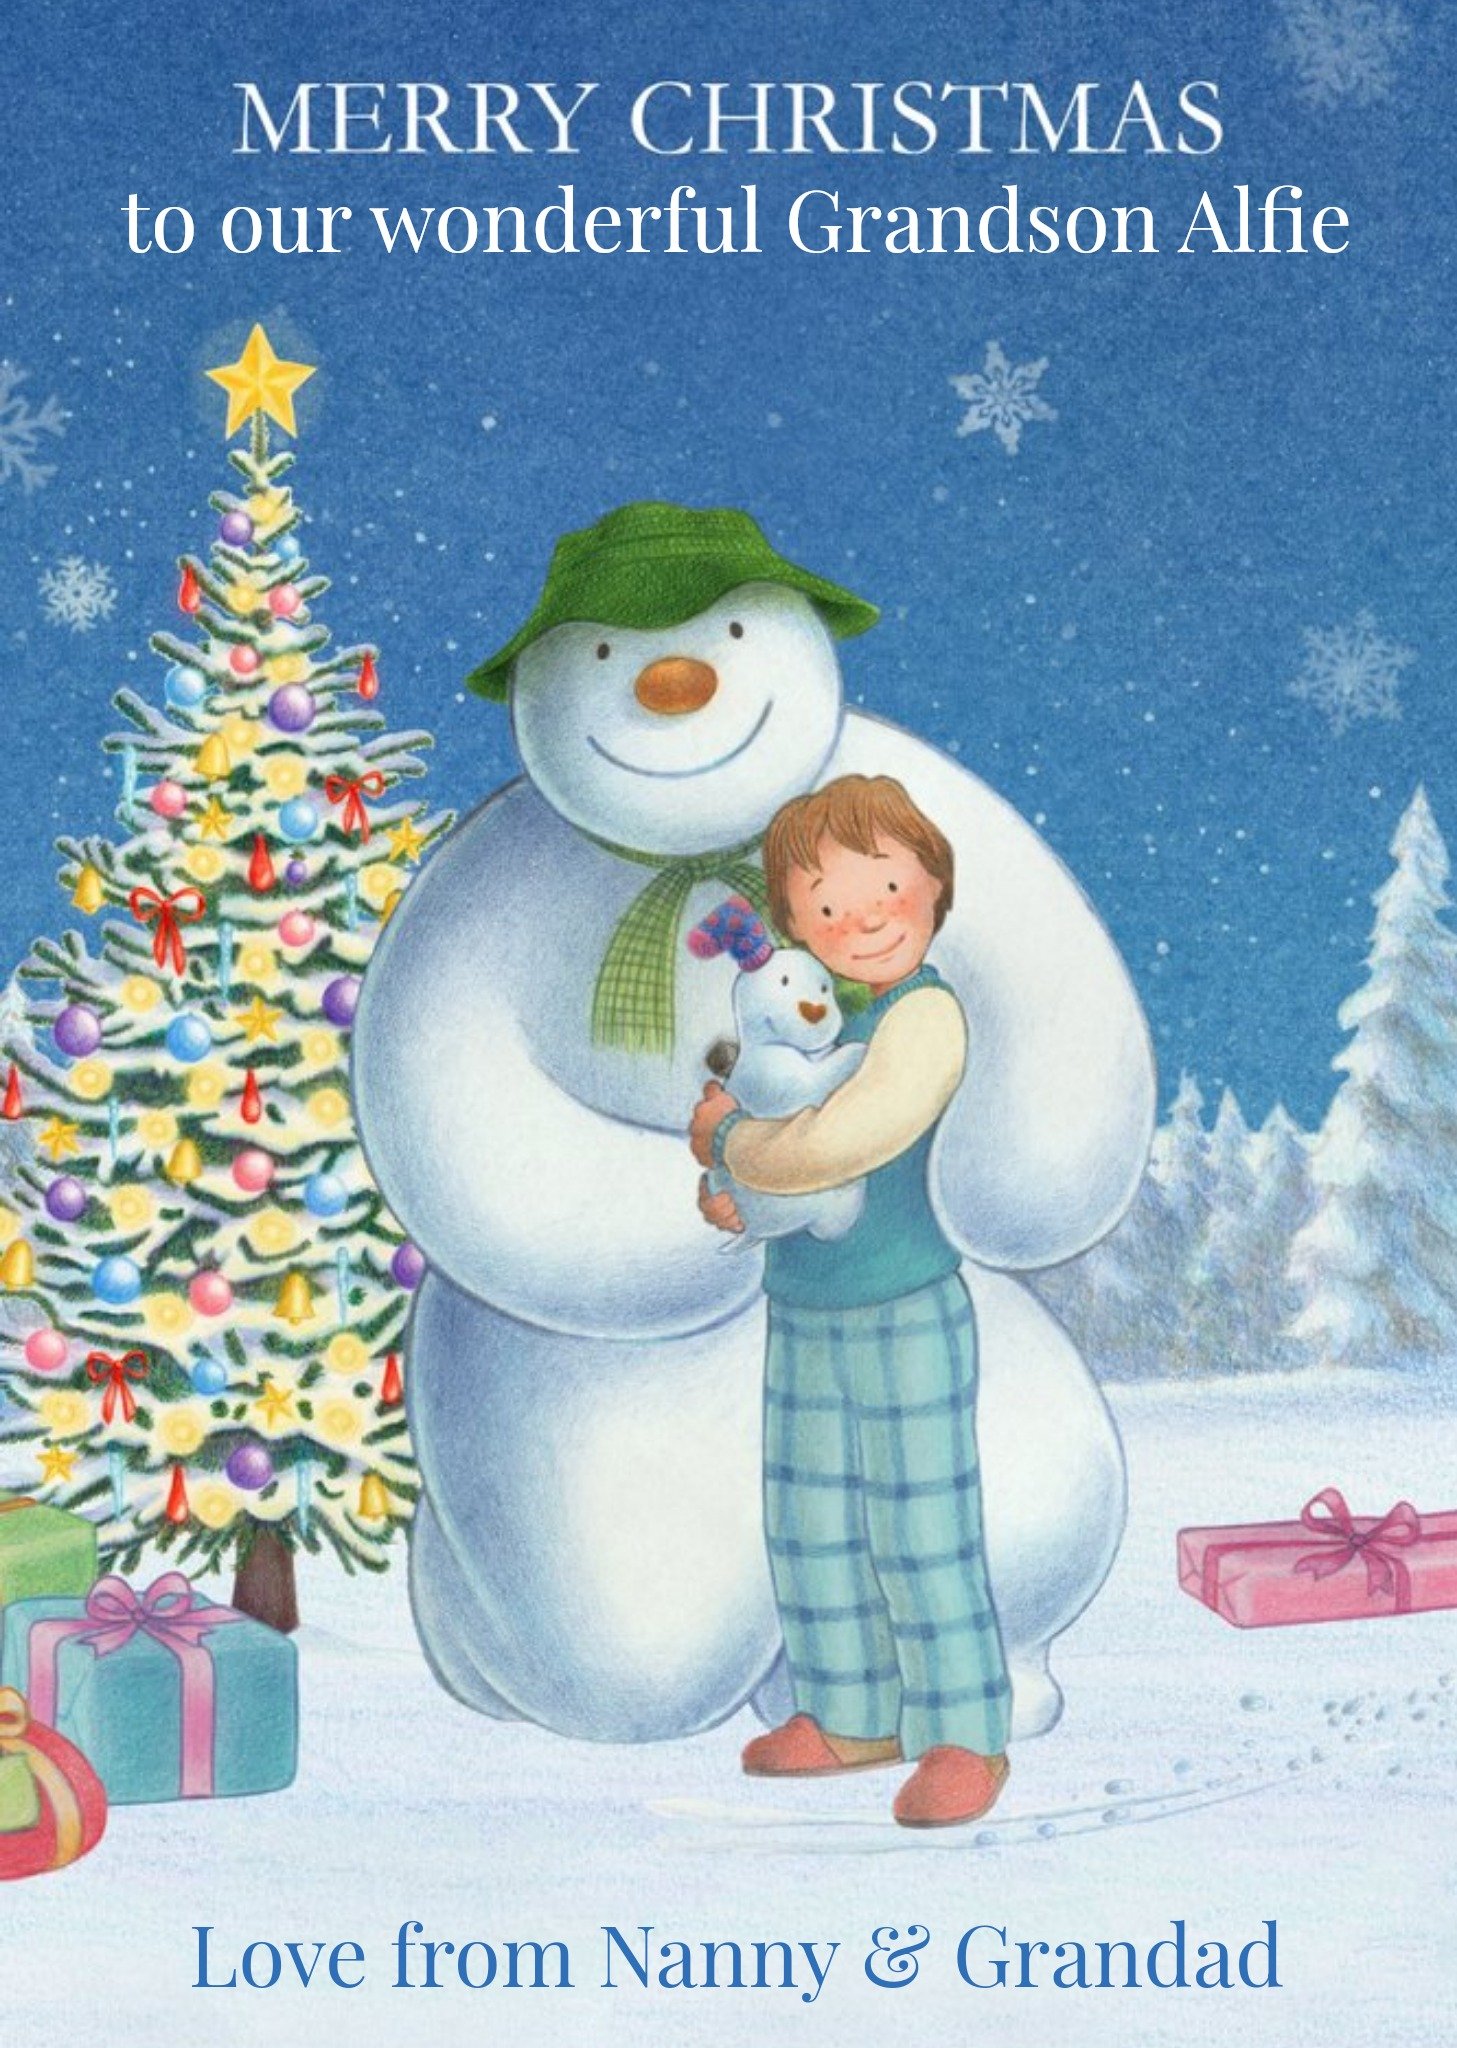 The Snowman Wonderful Grandson Personalised Christmas Greeting Card, Large